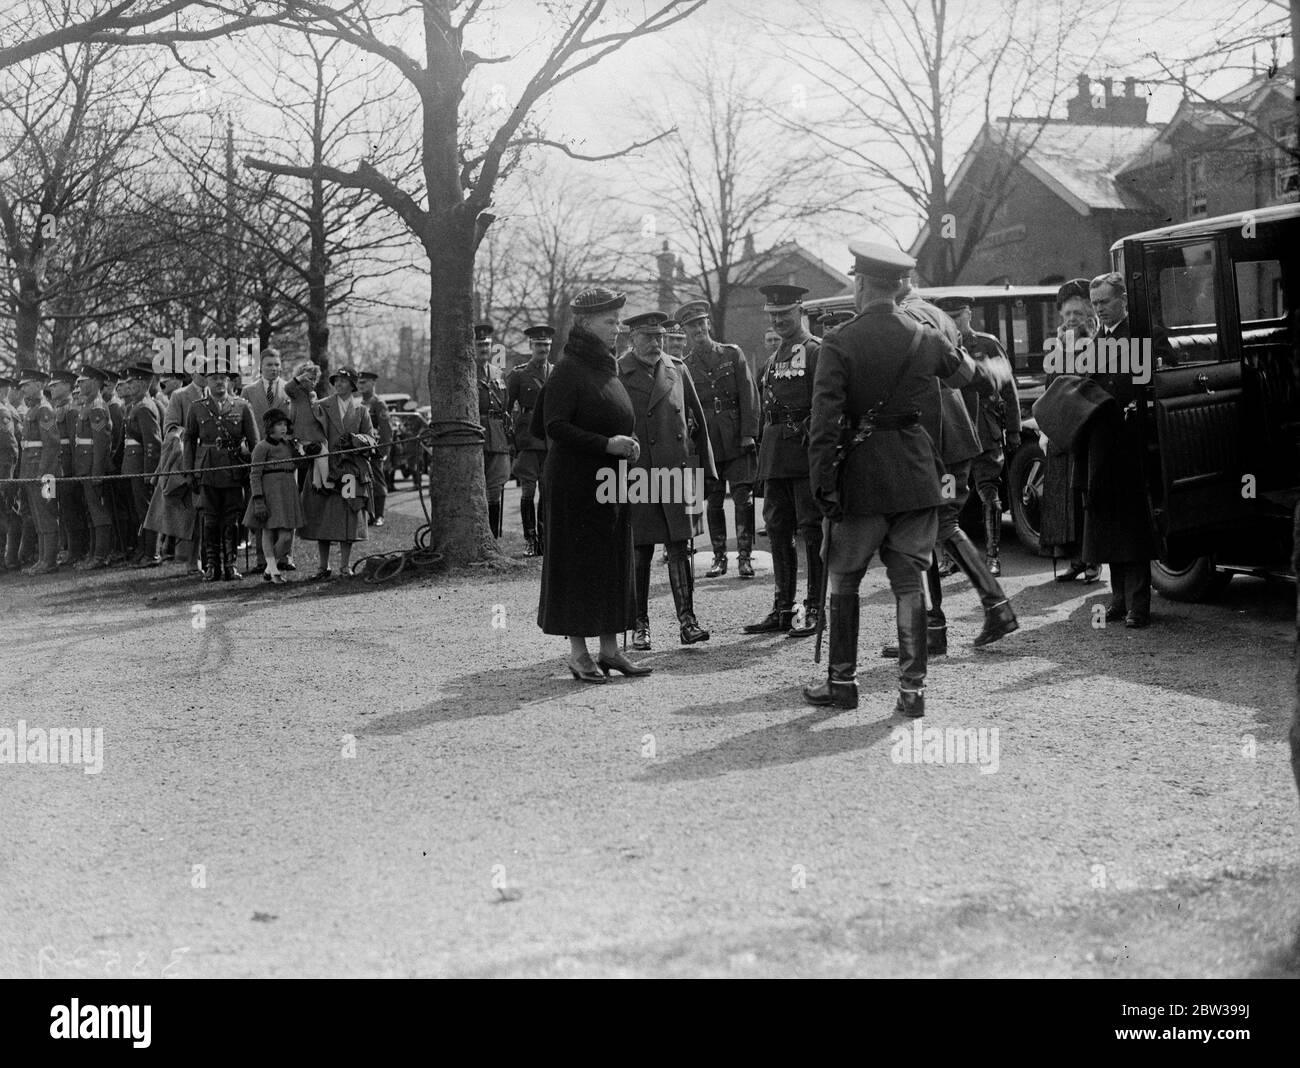 King and Queen visit Aldershot . Their Majesties , the King and Queen , drove from Windsor to Aldershot and spent the whole day visiting various sections of the camp and inspecting a number of regiments . Photo shows , the King and Queen being welcomed on arrival at Aldershot . 19 April 1934 . 30s, 30's, 1930s, 1930's, thirties, nineteen thirties Stock Photo